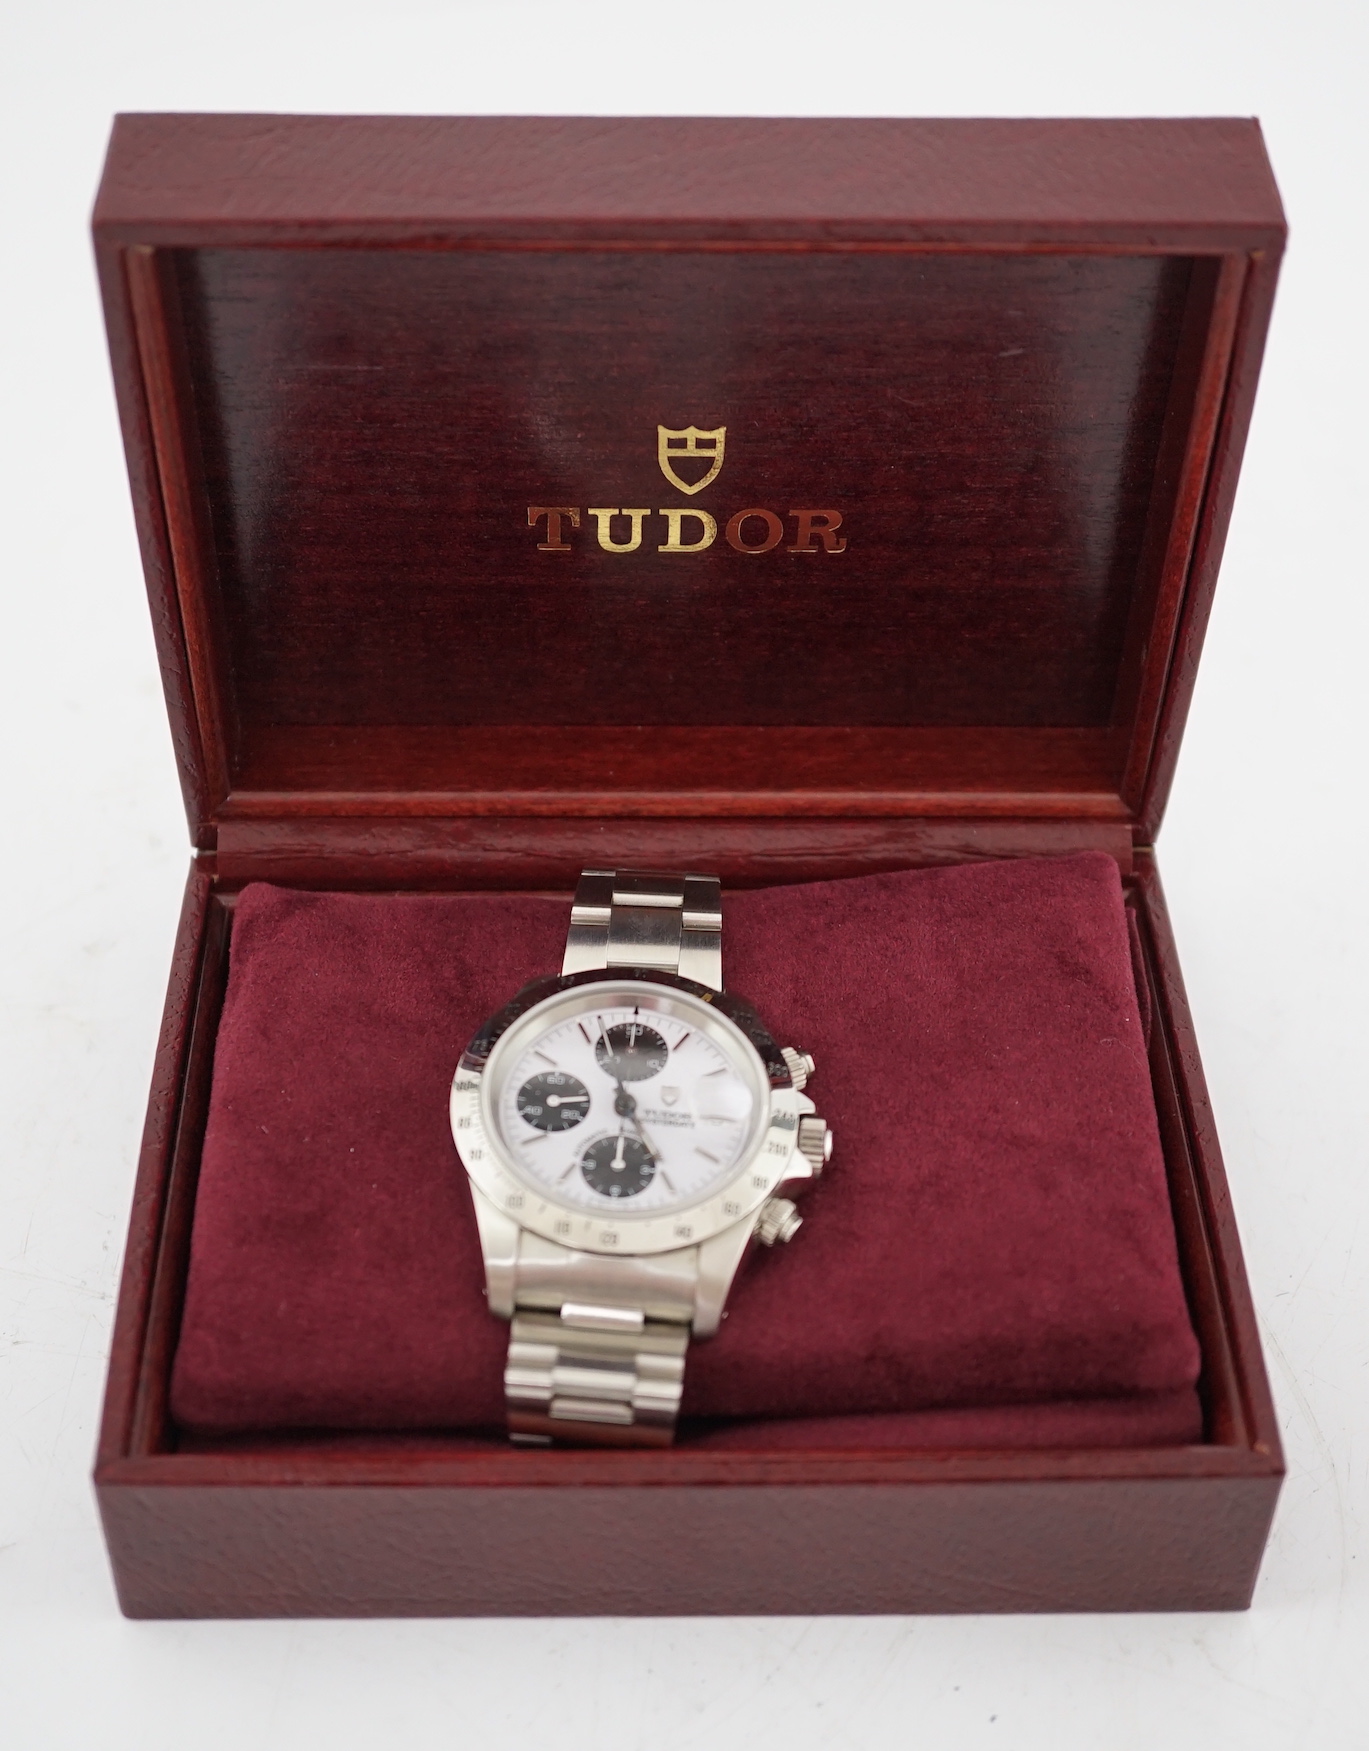 A gentleman's 2002 stainless steel Tudor Oysterdate Automatic Chrono Time 'Big Block' panda dial wrist watch